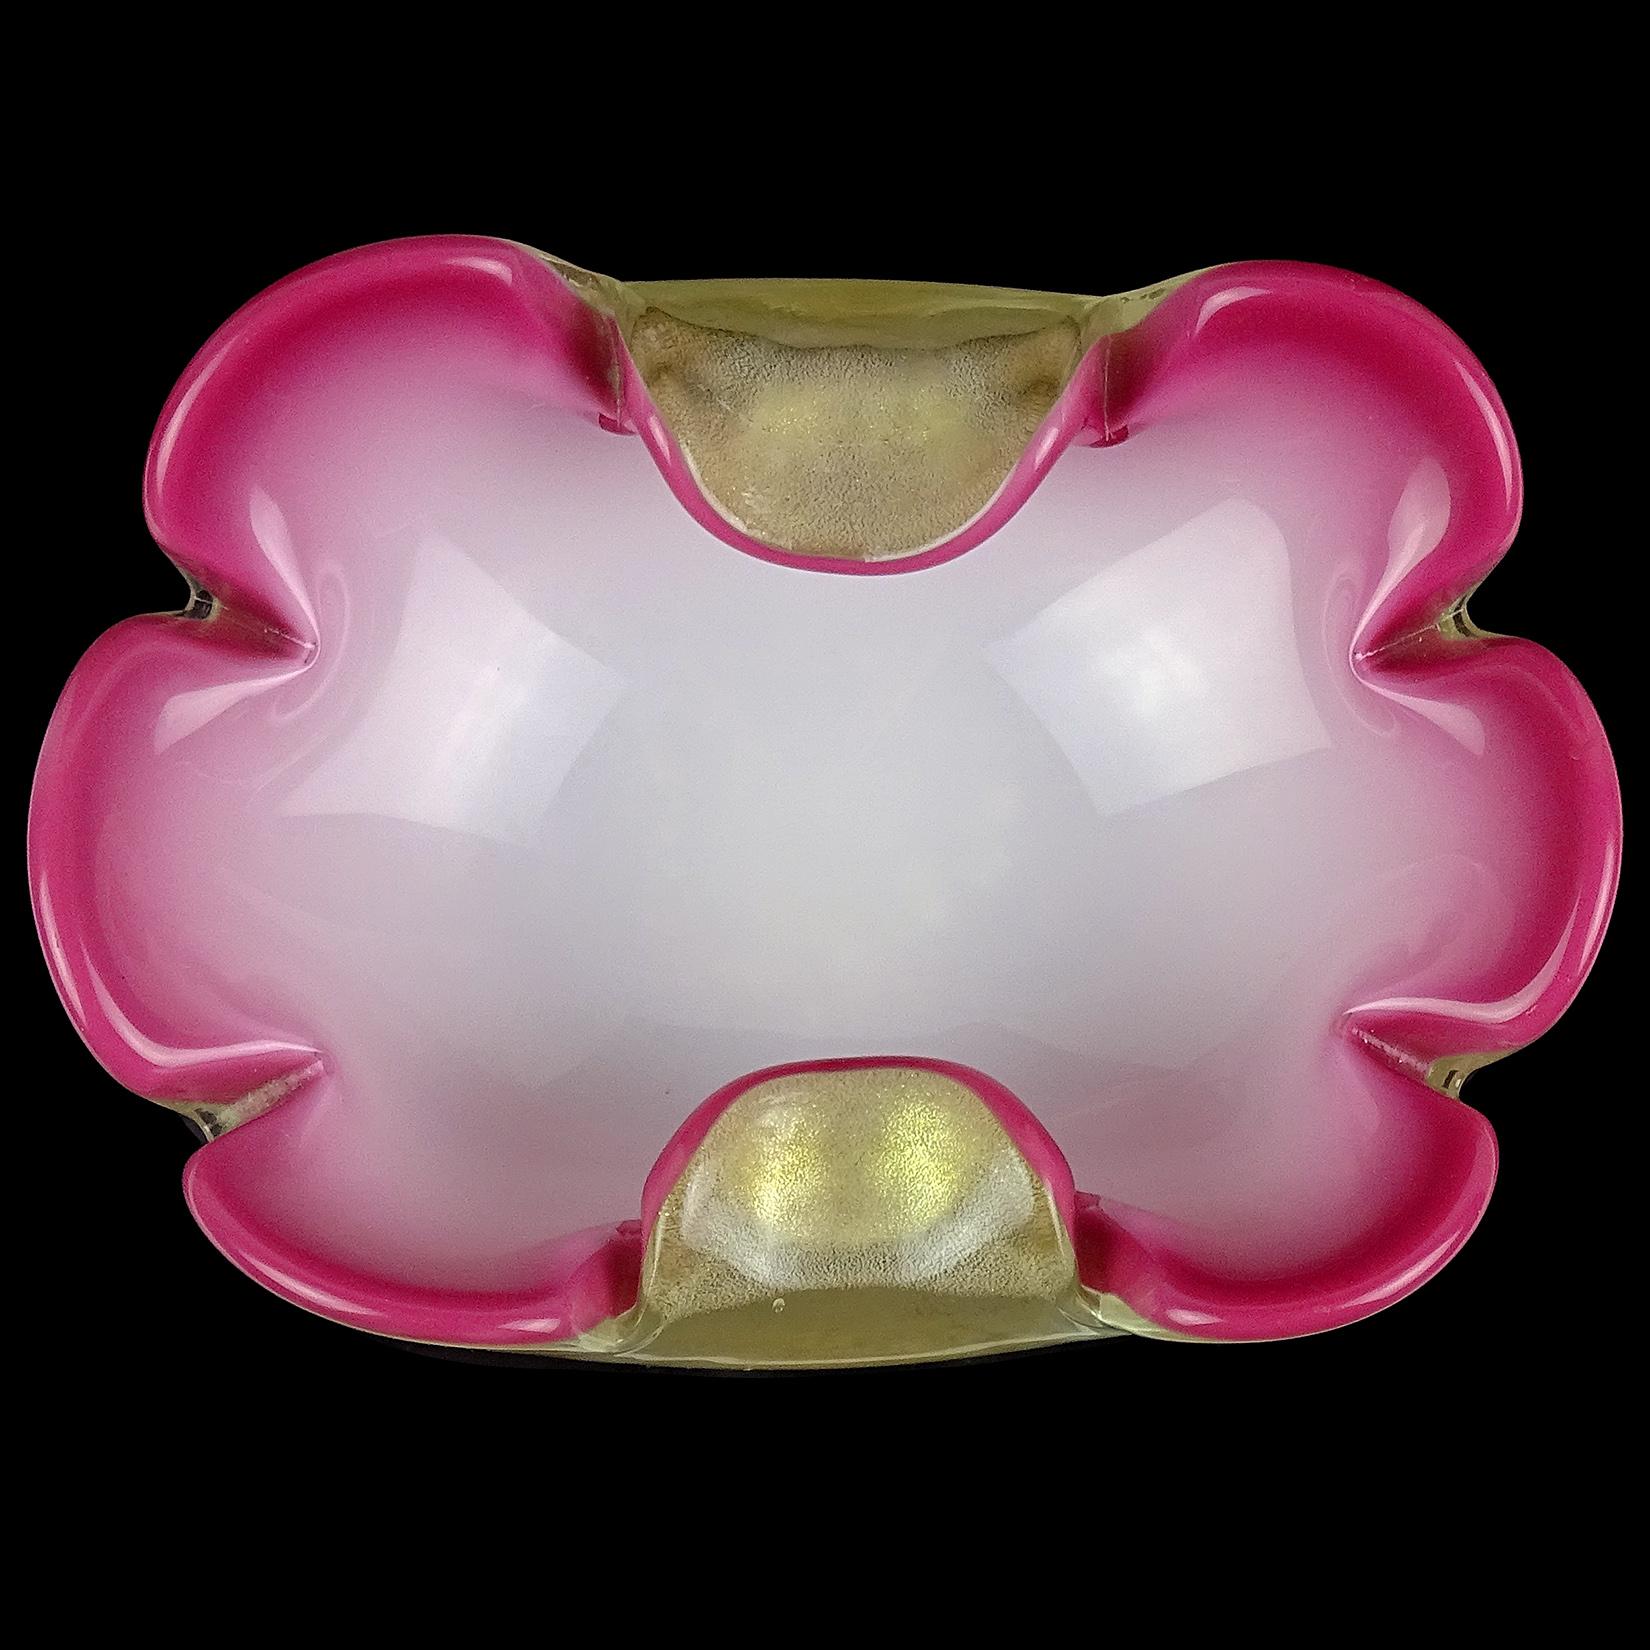 Beautiful vintage Murano hand blown dark pink, white and gold flecks Italian art glass flower shaped bowl. Attributed to designer Archimede Seguso. The bowl is profusely covered in gold leaf on the outside, with 2 petals folded in at the sides. The